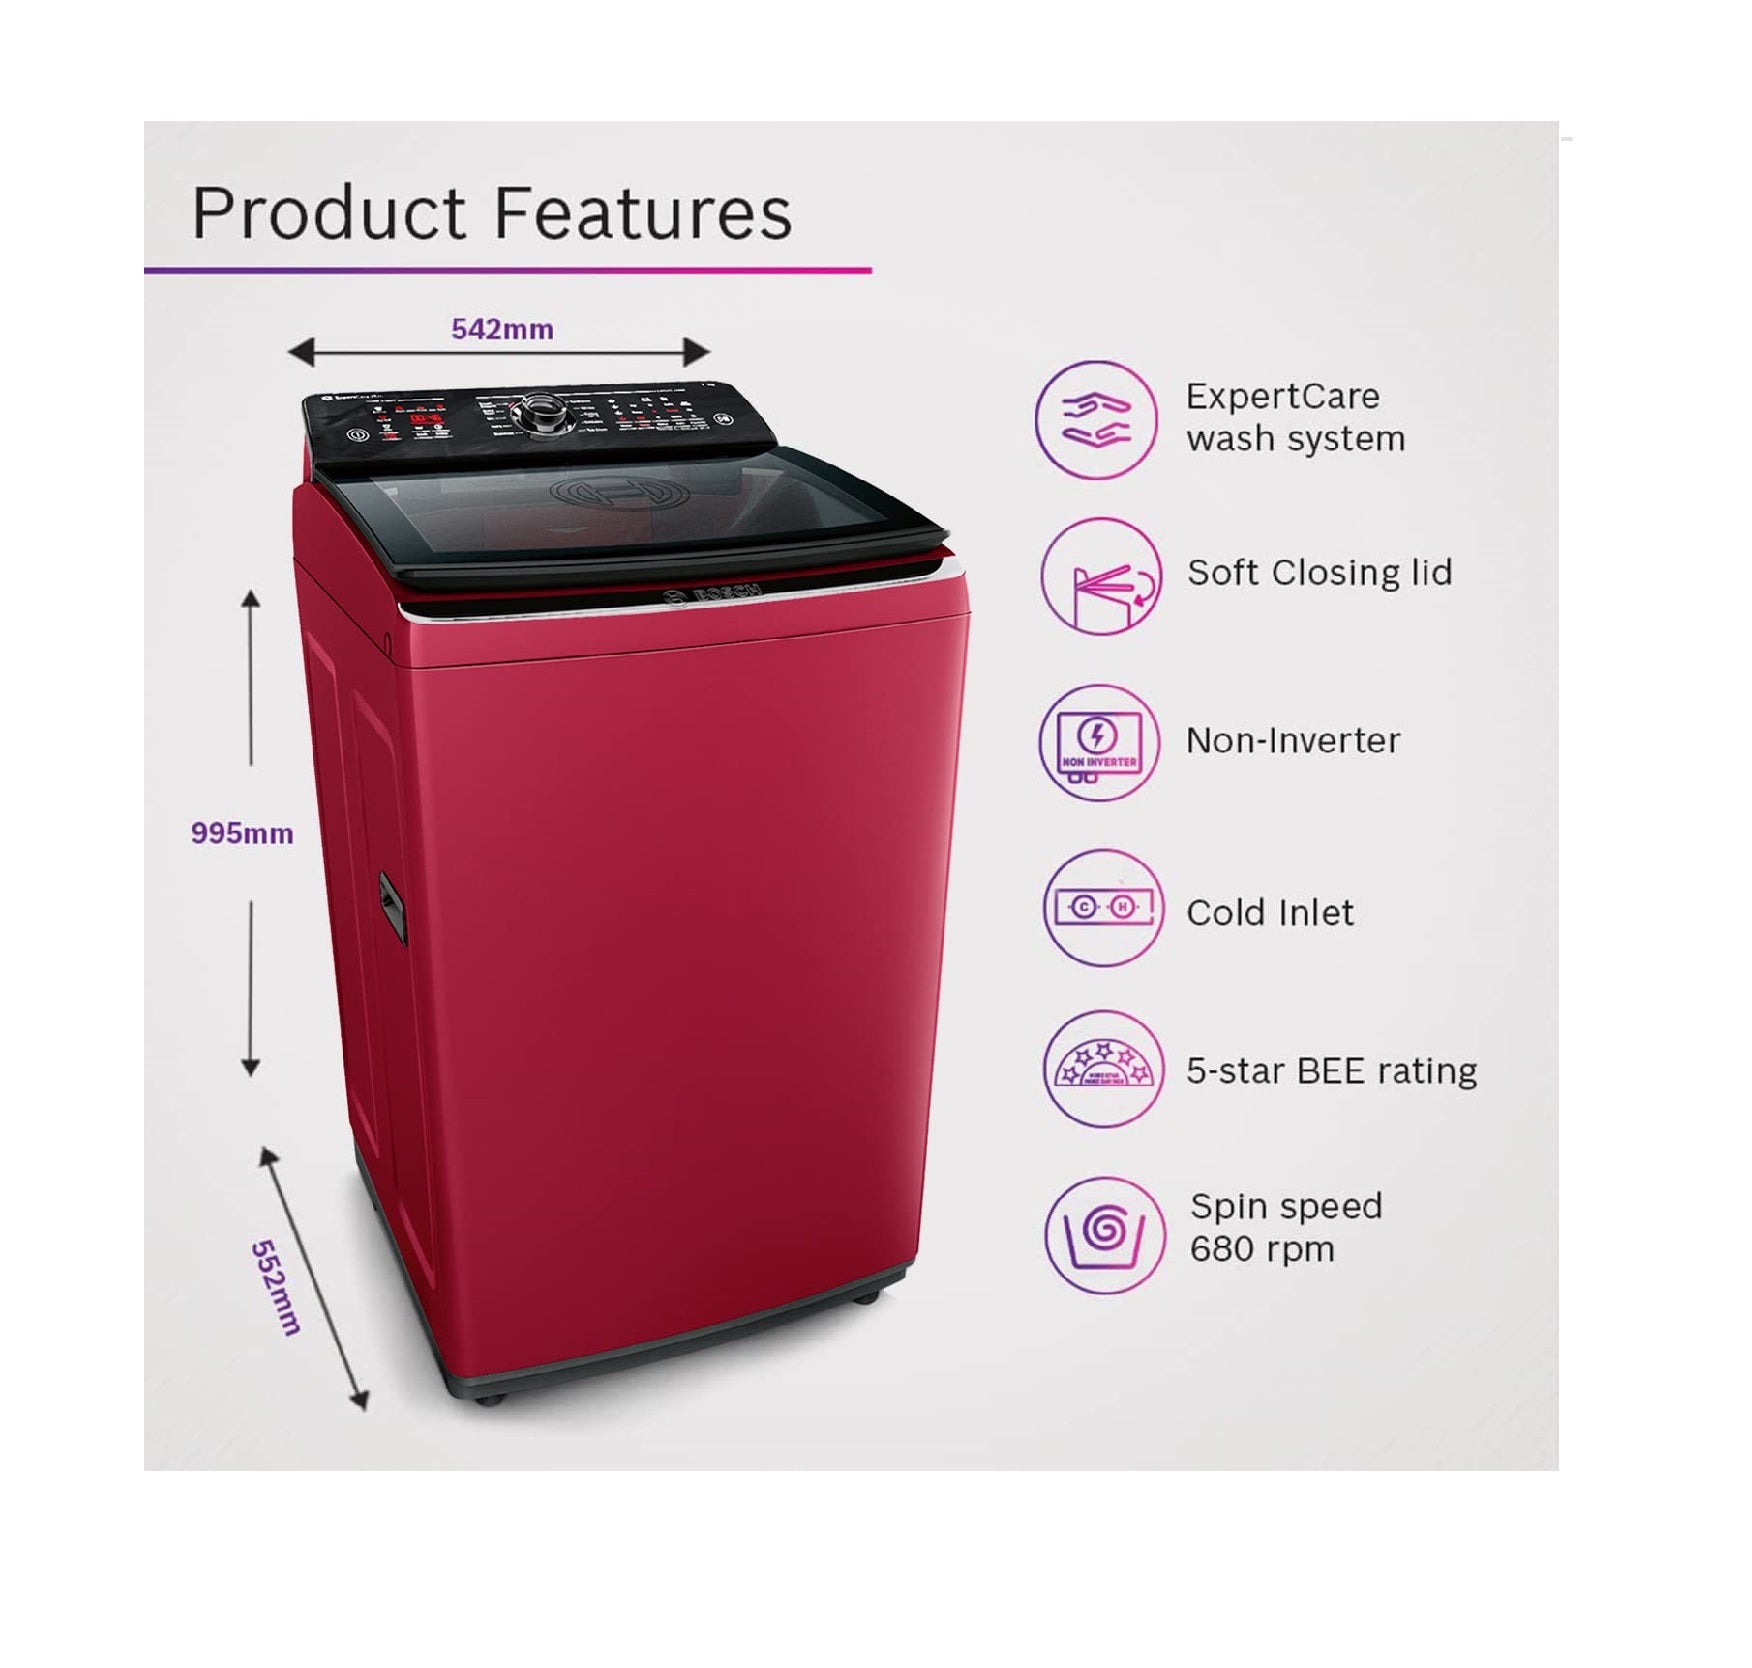 Bosch WOE753M0IN 7.5 Kg 5 Star Fully Automatic Top Load Washing Machine, Maroon